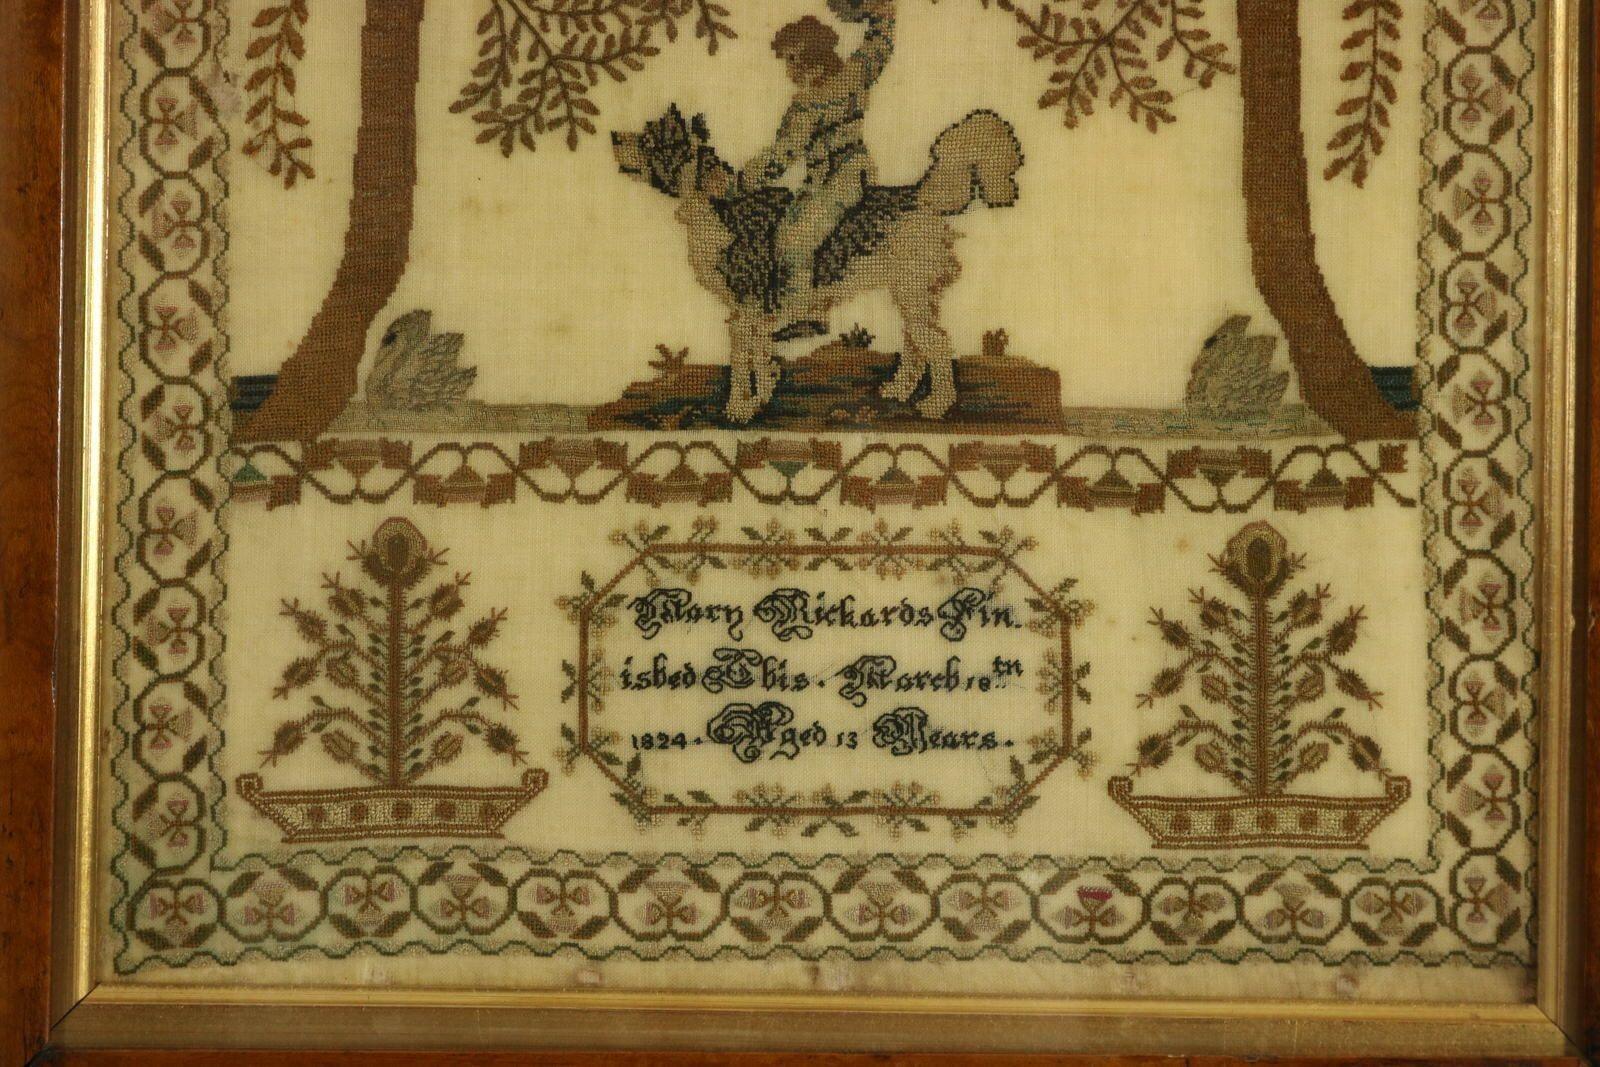 Georgian Antique Sampler, 1824, by Mary Richards aged 13